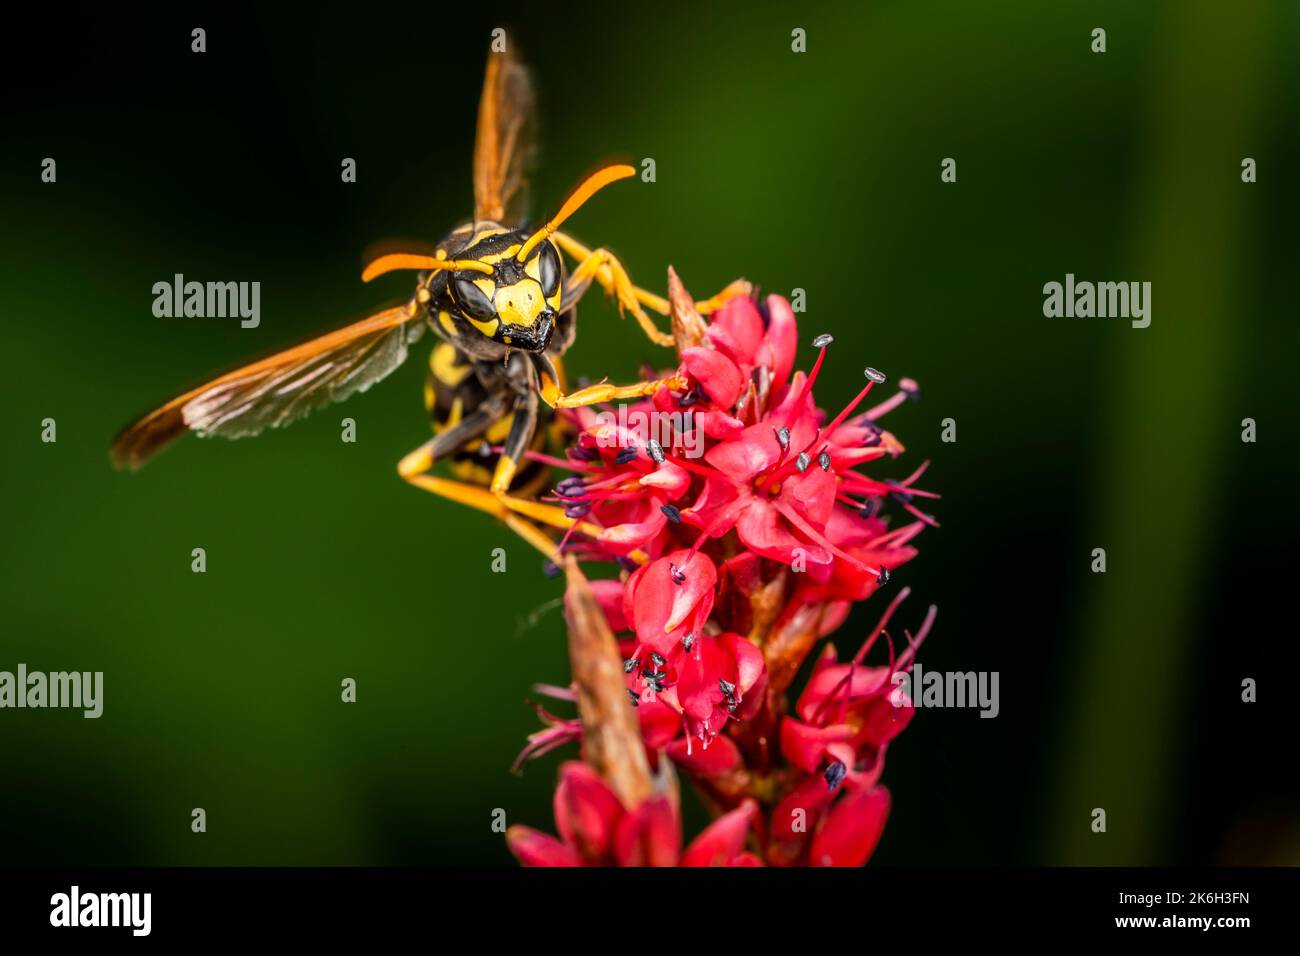 Close-up of a European Paper Wasp foraging from flower to flower in a backyard garden. Stock Photo